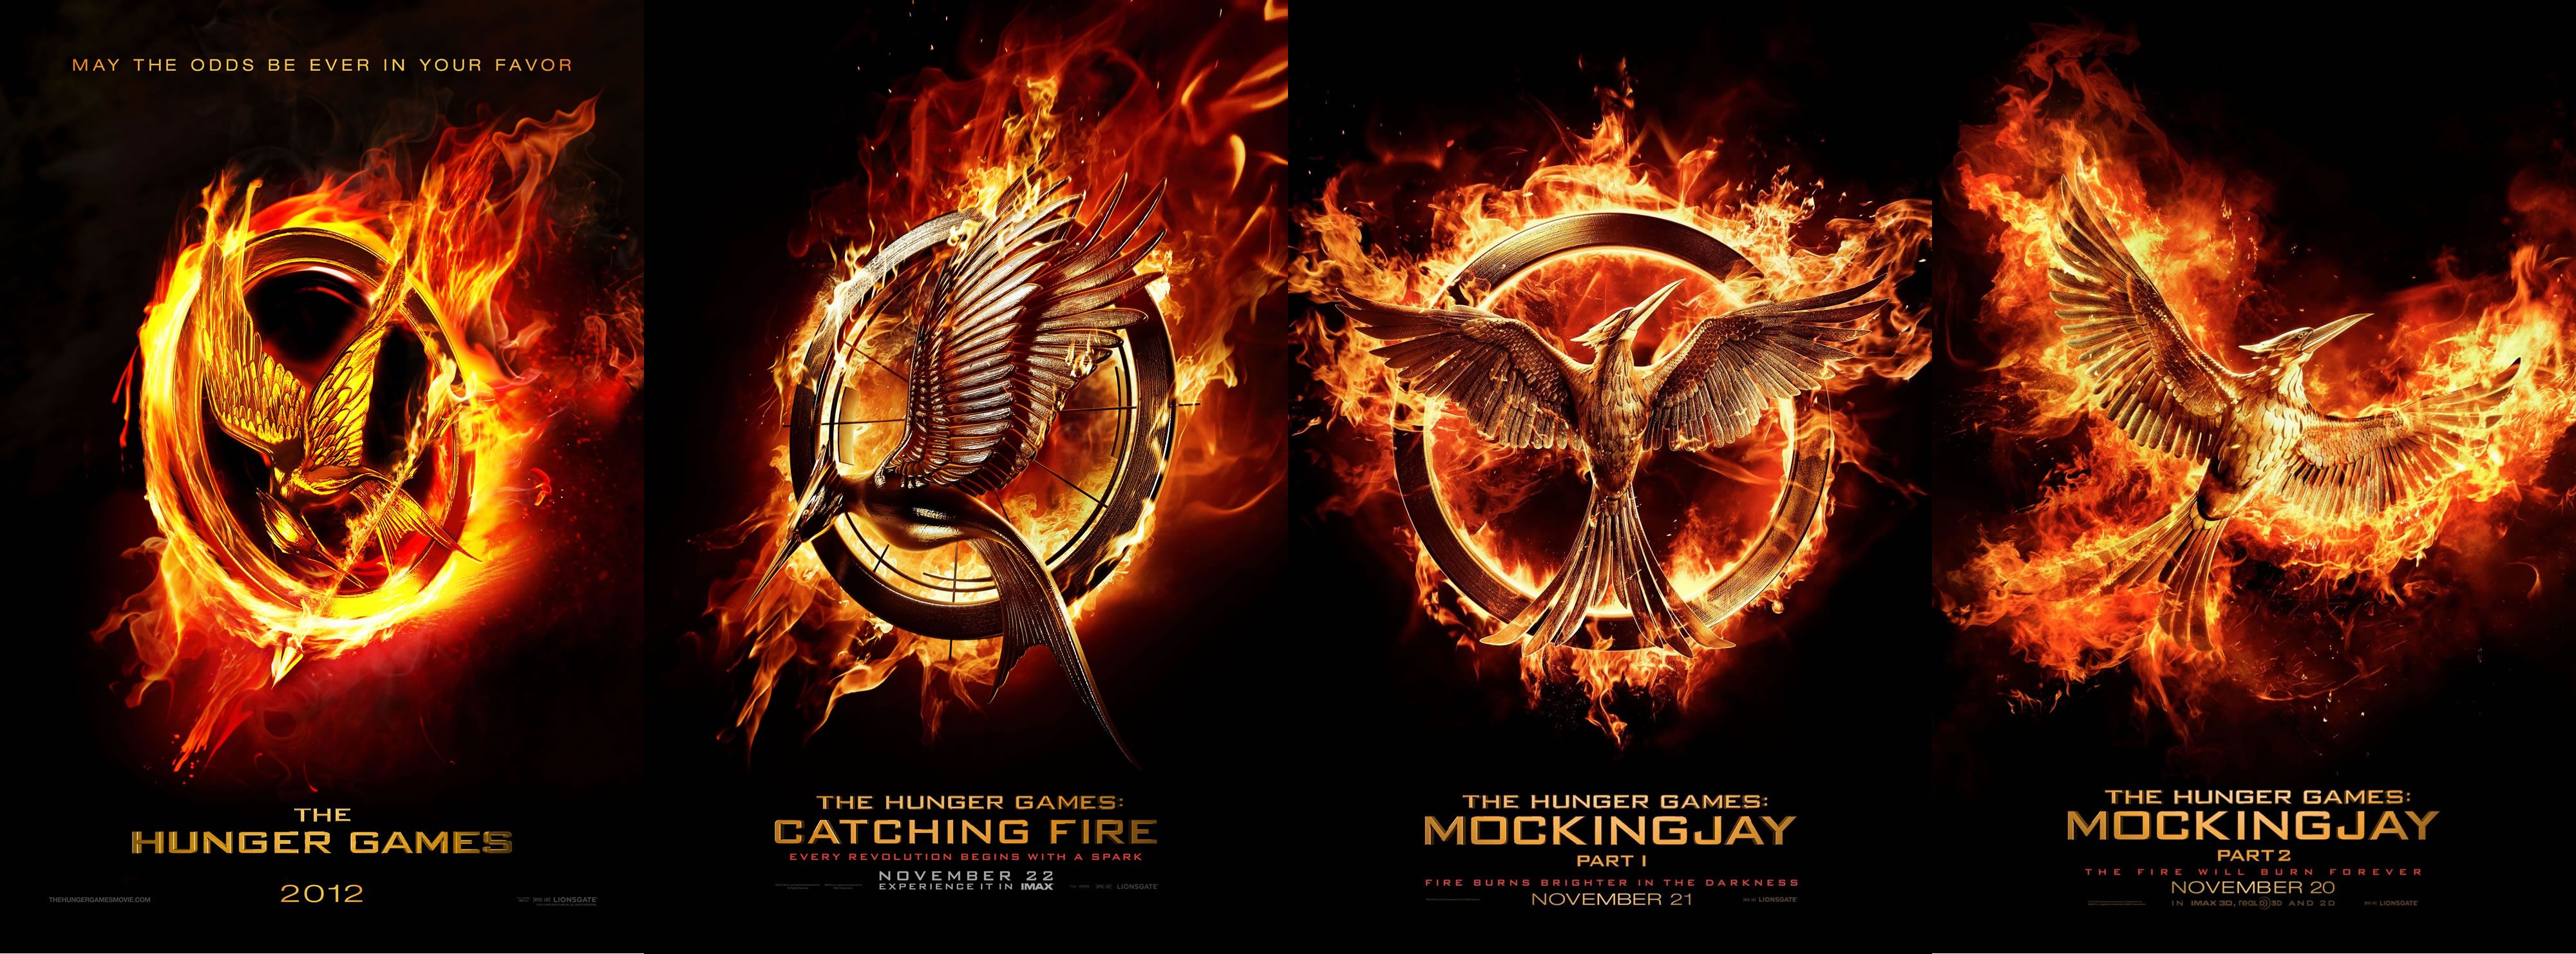 Delicious Reads: The Hunger Games: Mockingjay Part 2 {Book to Movie}